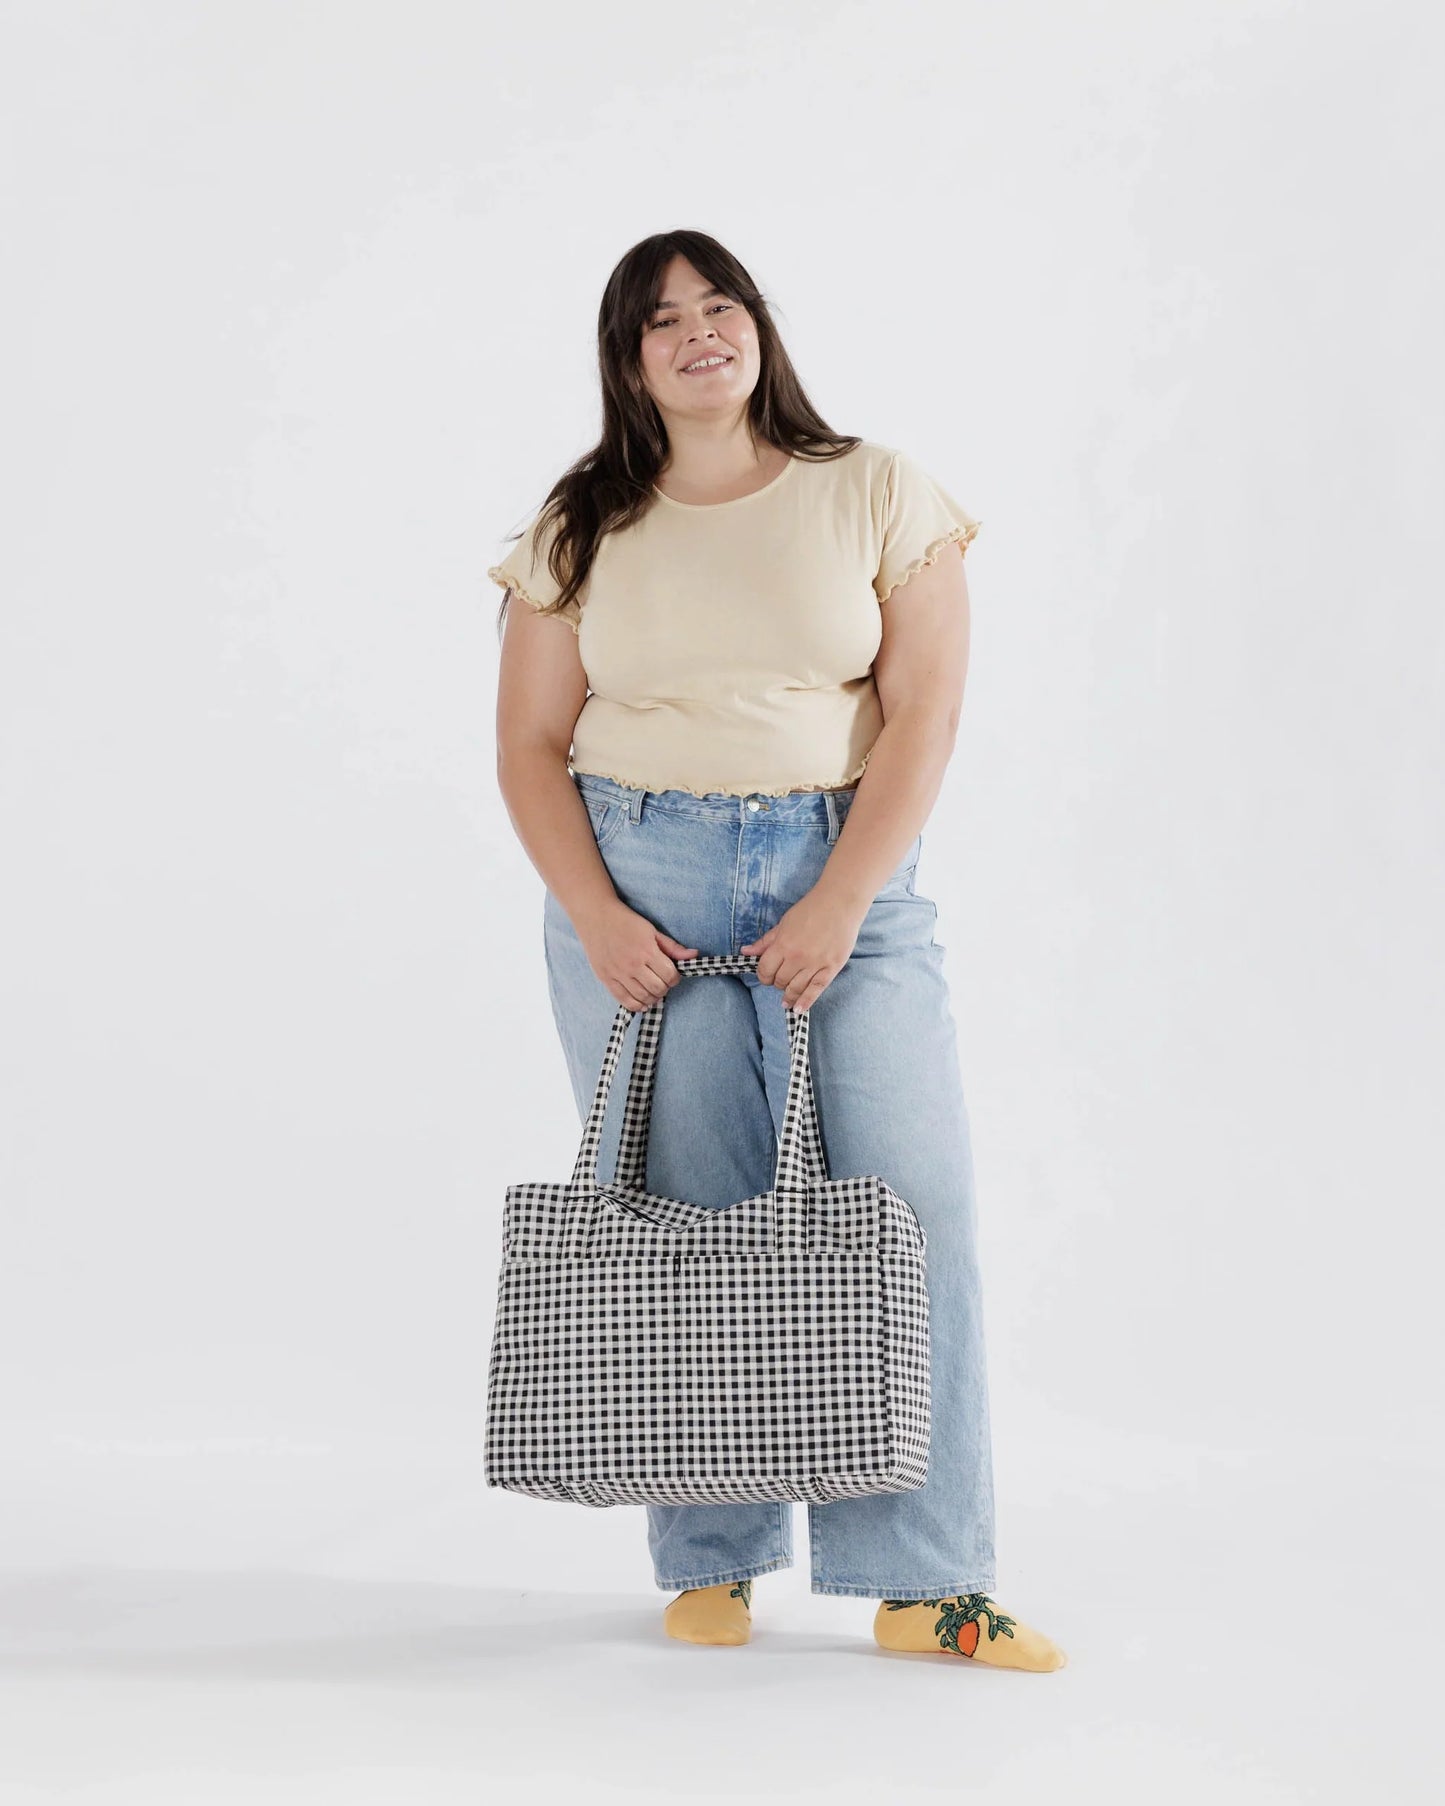 Cloud Carry-on - Black & White Gingham